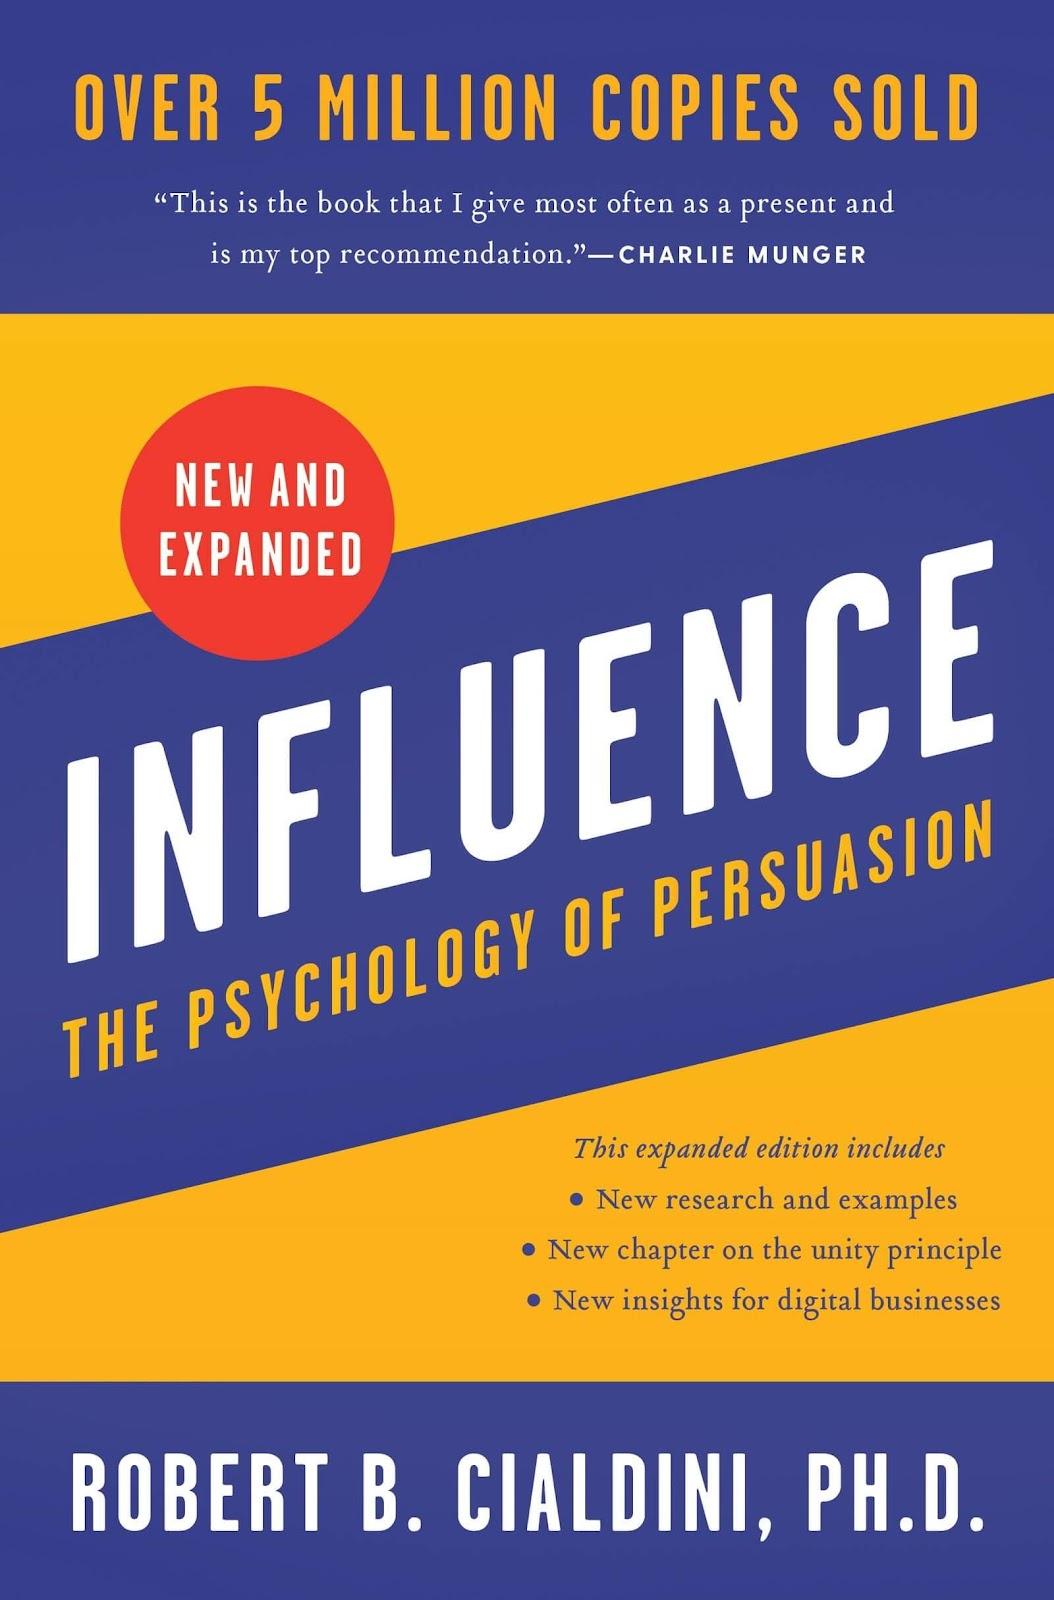 Book cover for Robert B. Cialdini's "Influence: The Psychology Of Persuasion"